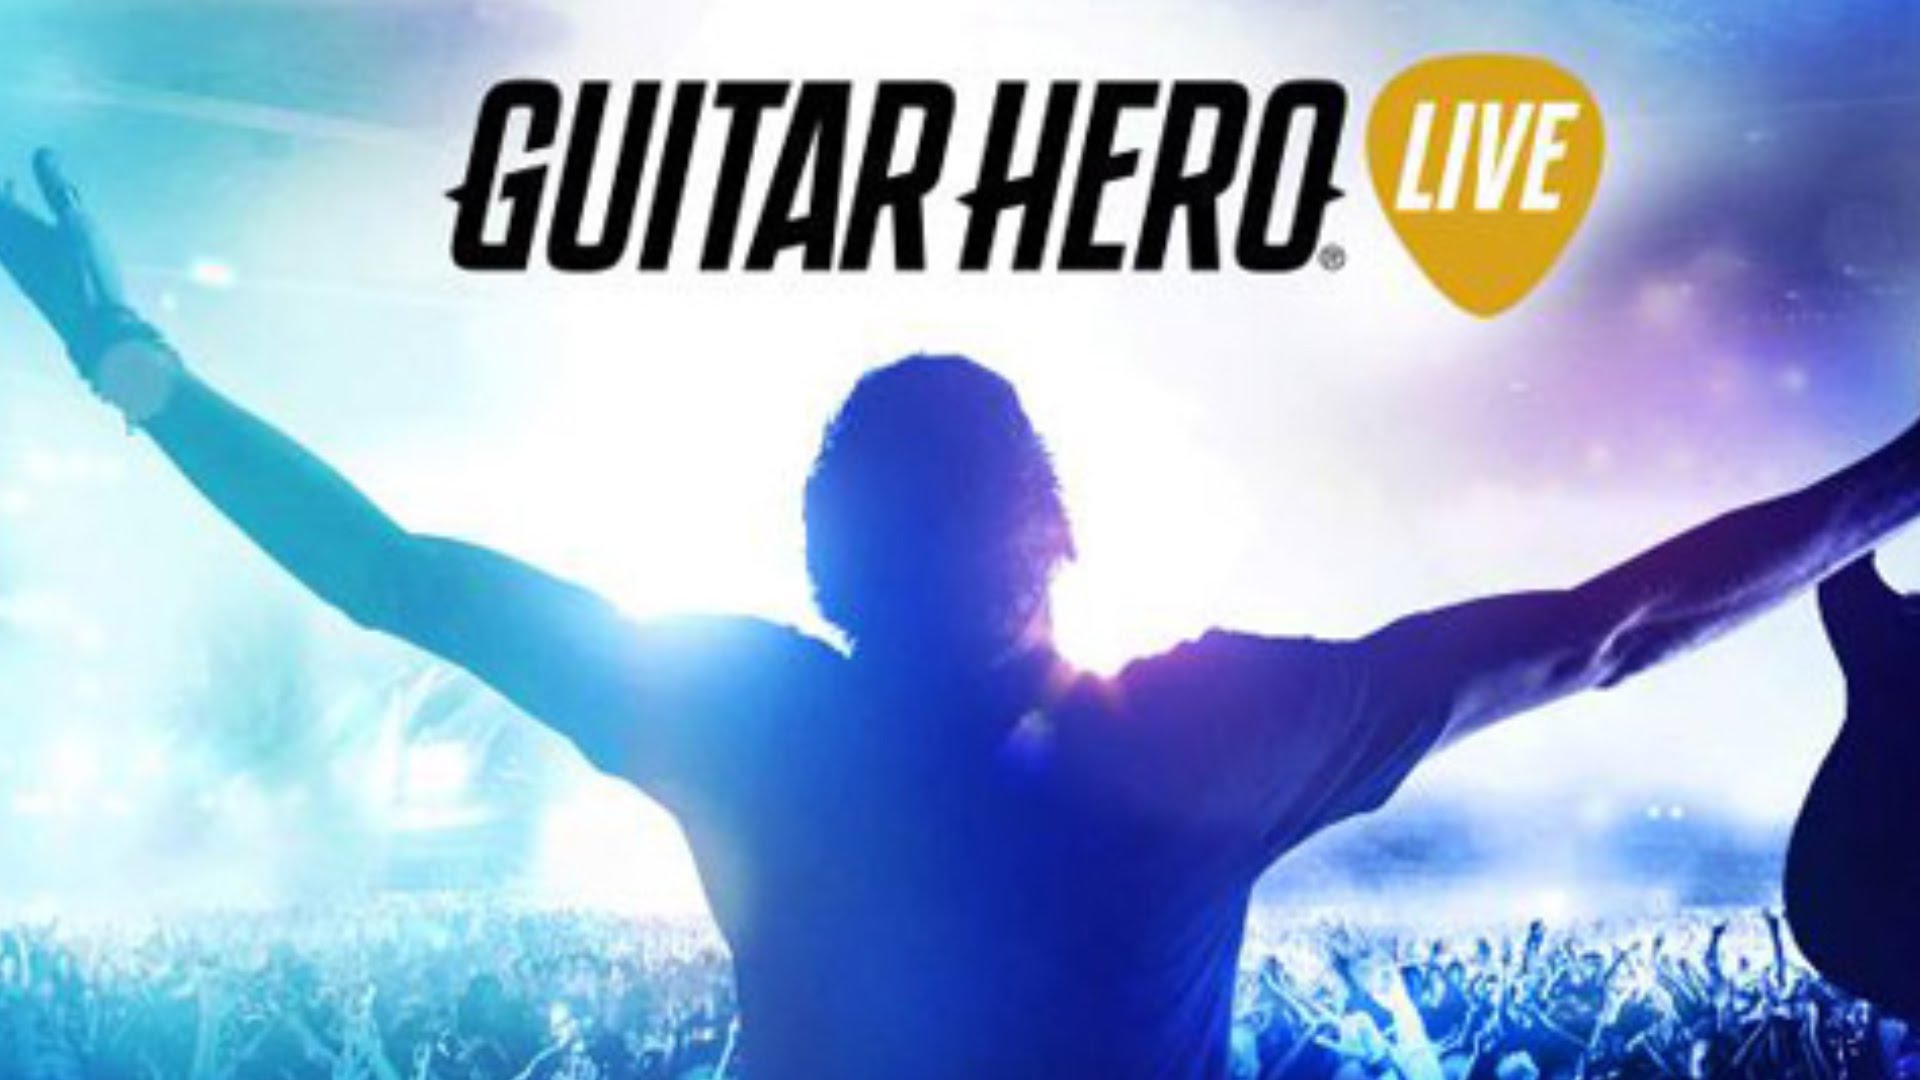 Image for Activision CEO says he had a "really cool vision" for the next Guitar Hero game